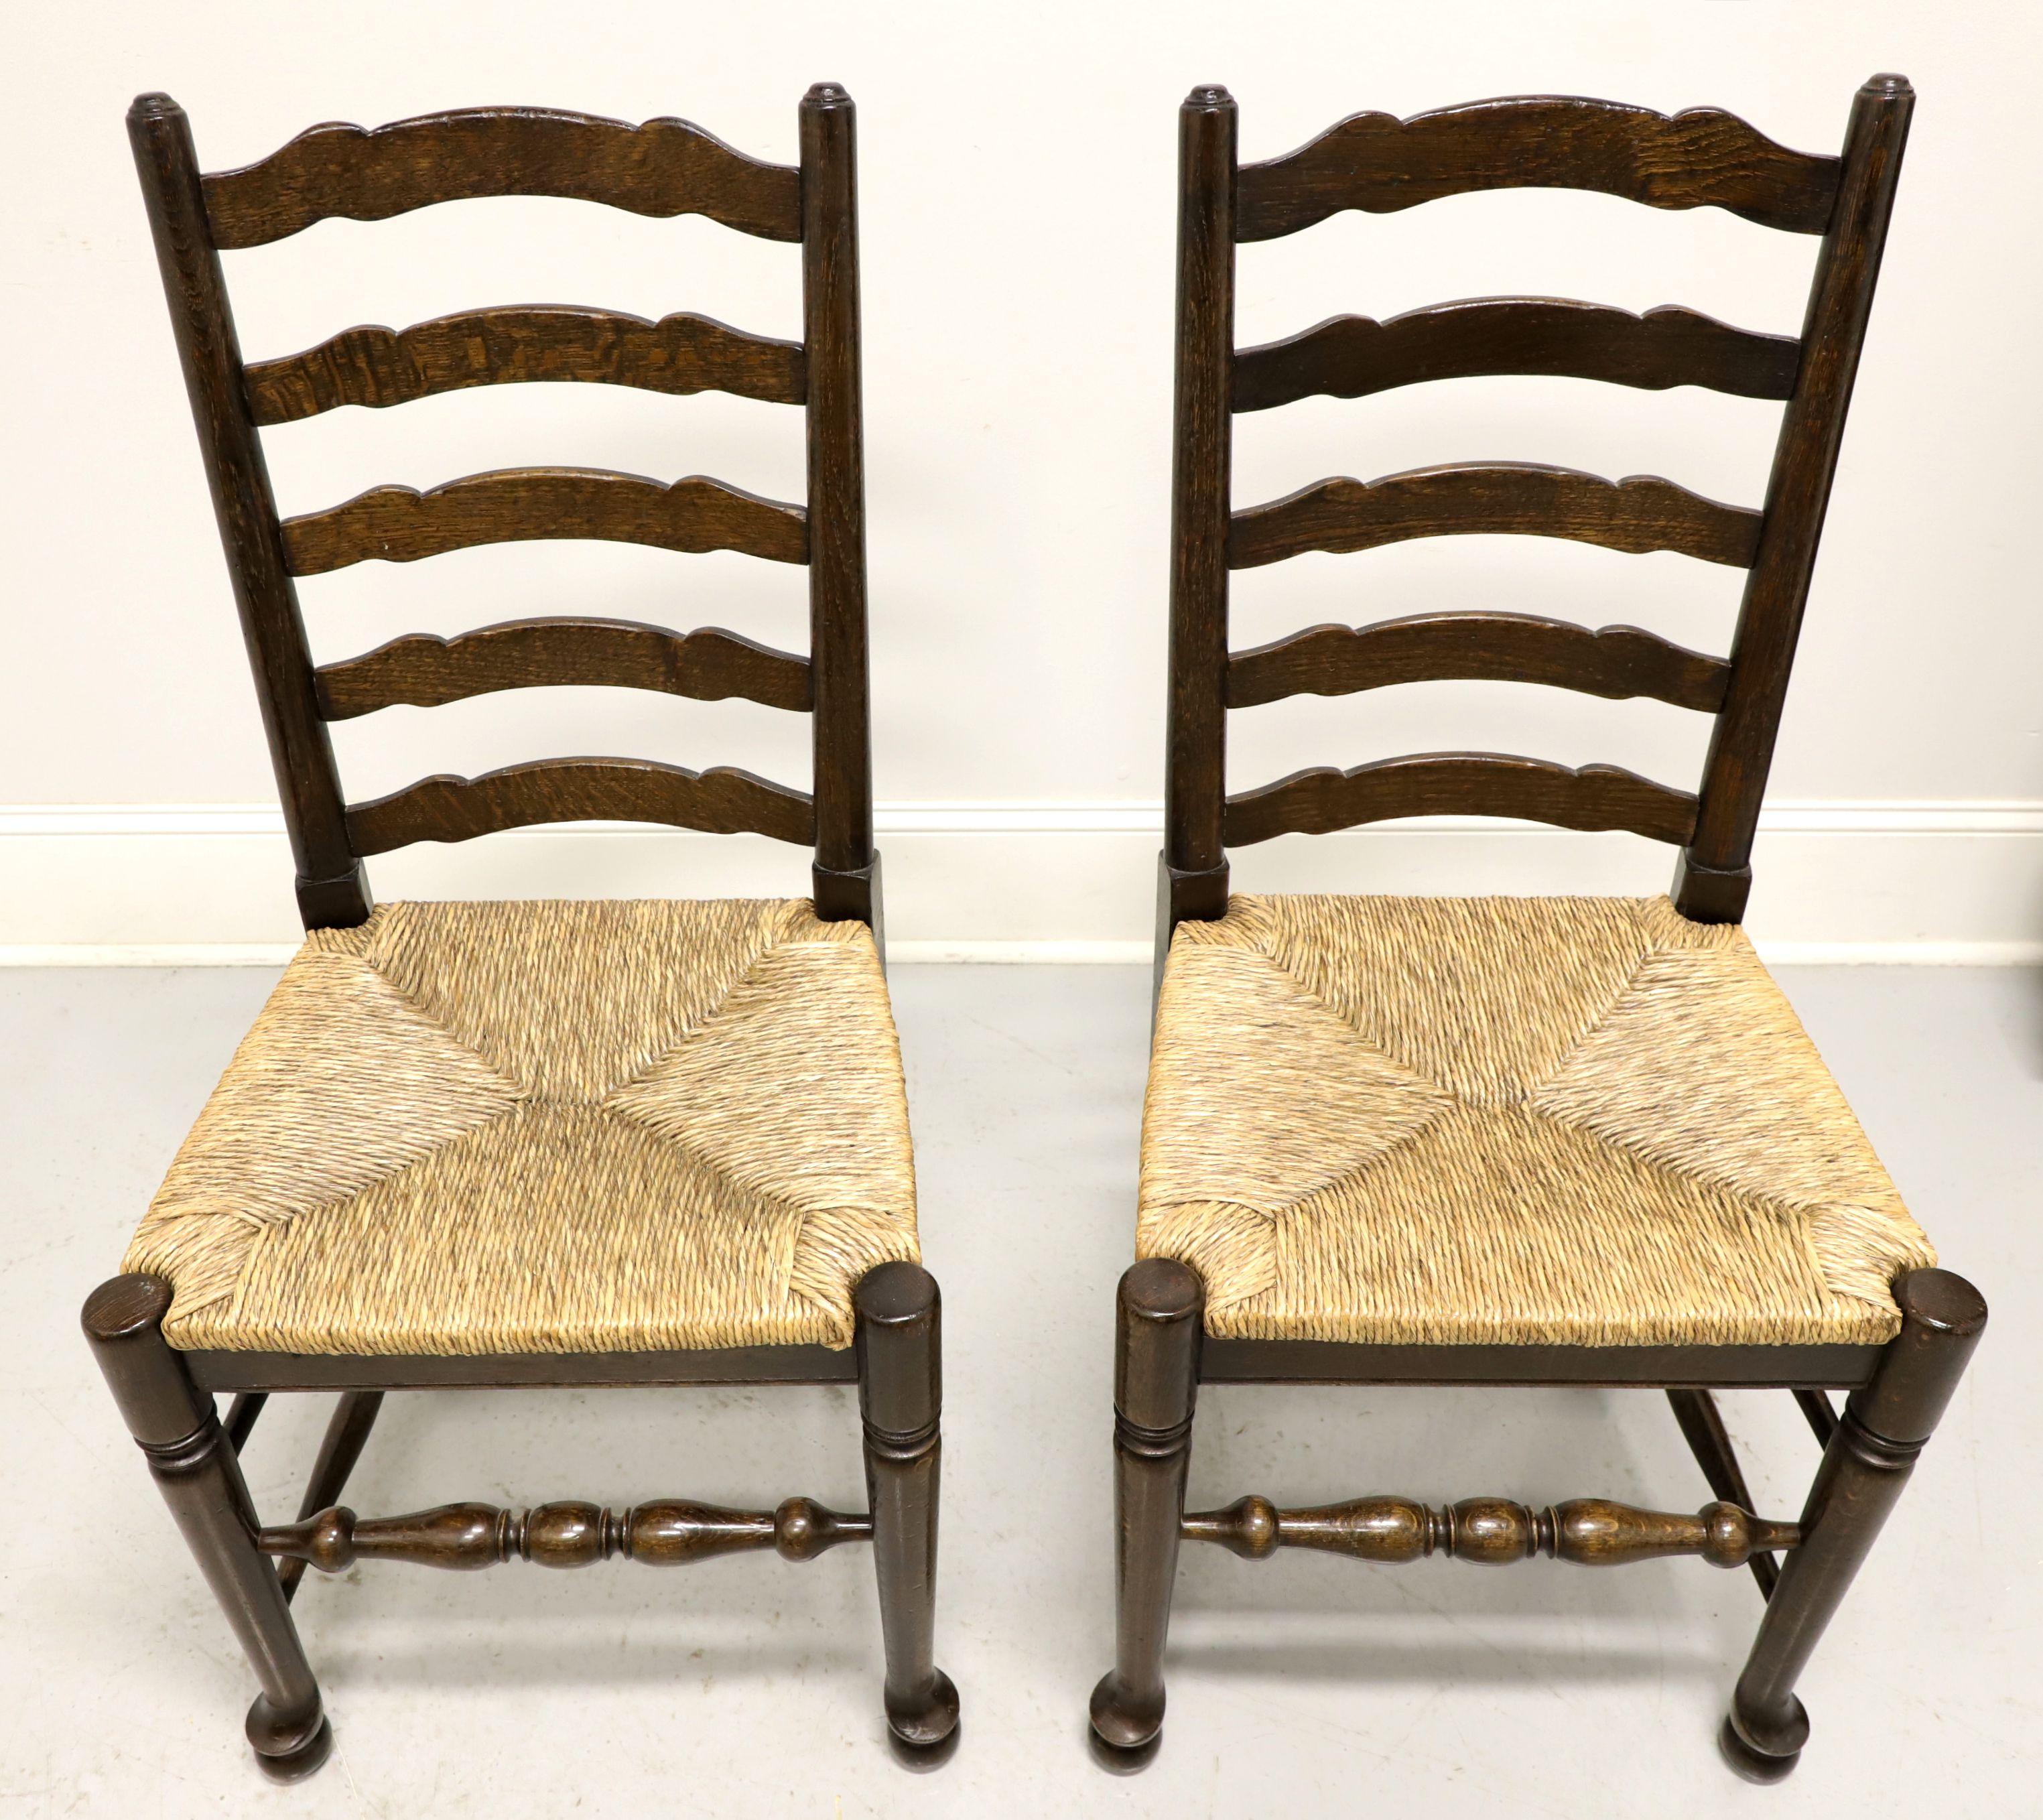 A pair of Cottage style dining side chairs, unbranded, similar in quality to Ethan Allen. Walnut with carved ladder back design, rush seats, turned legs and stretchers. Made in the USA, in the mid-20th century.

Measures: overall: 19W 18D 39.5H,